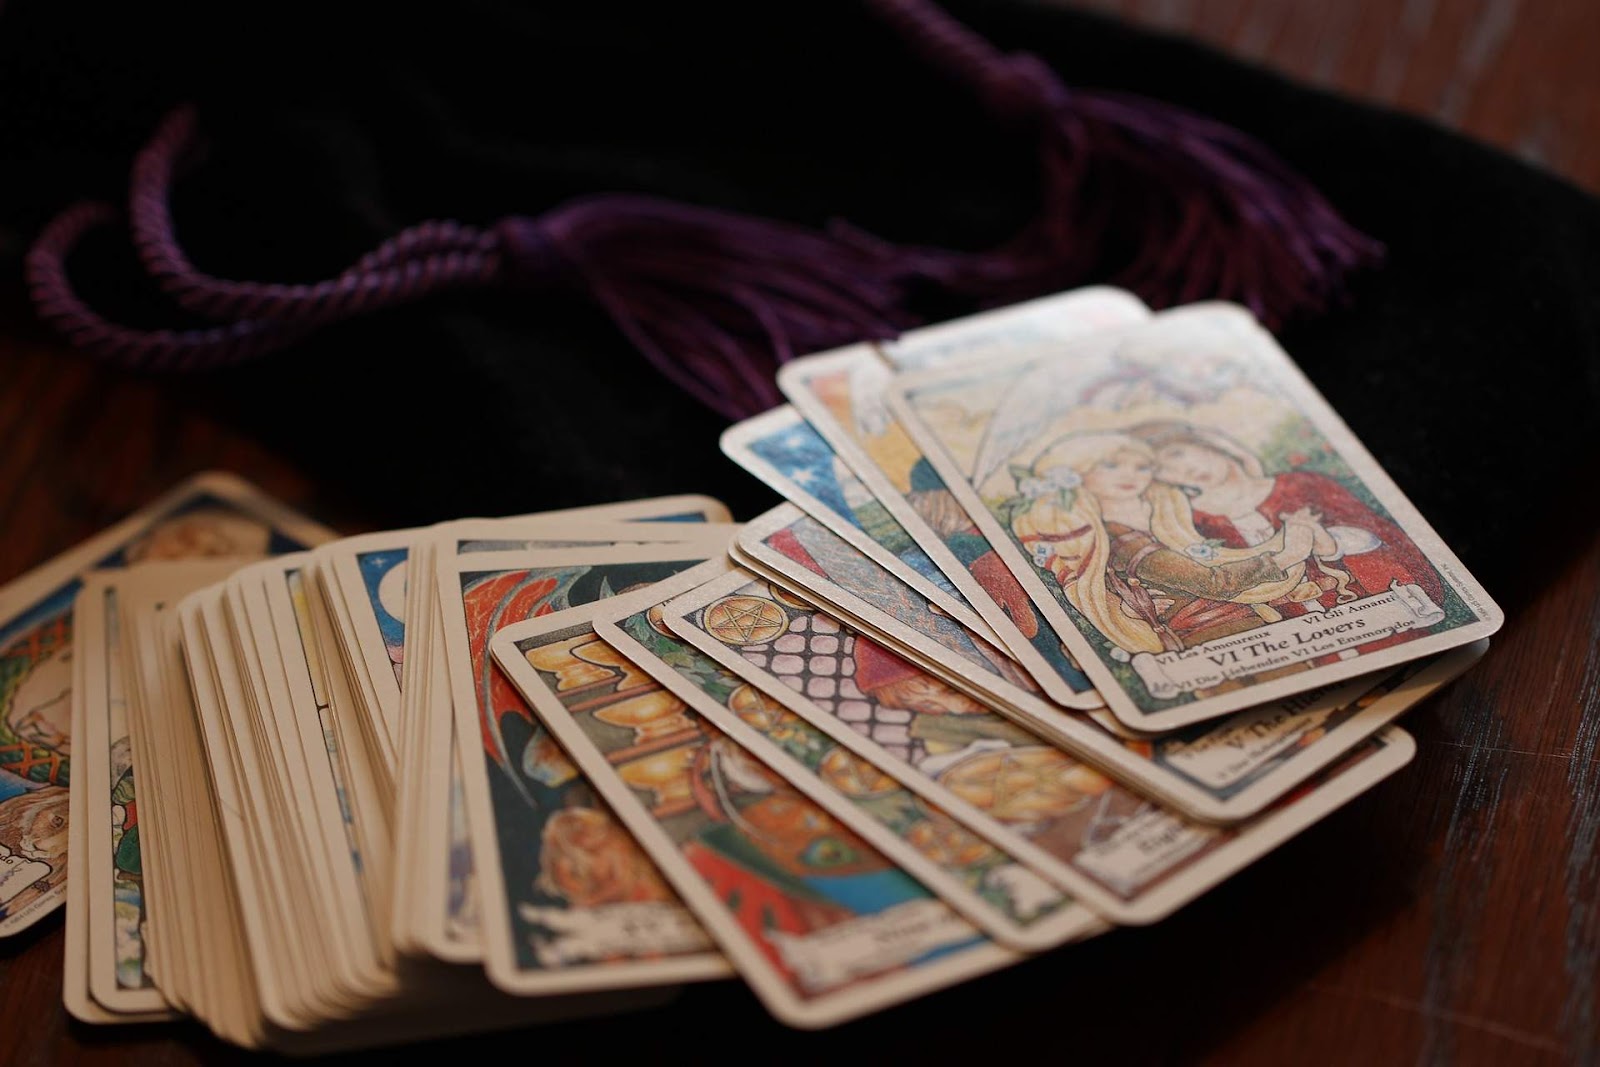 Astrology cards